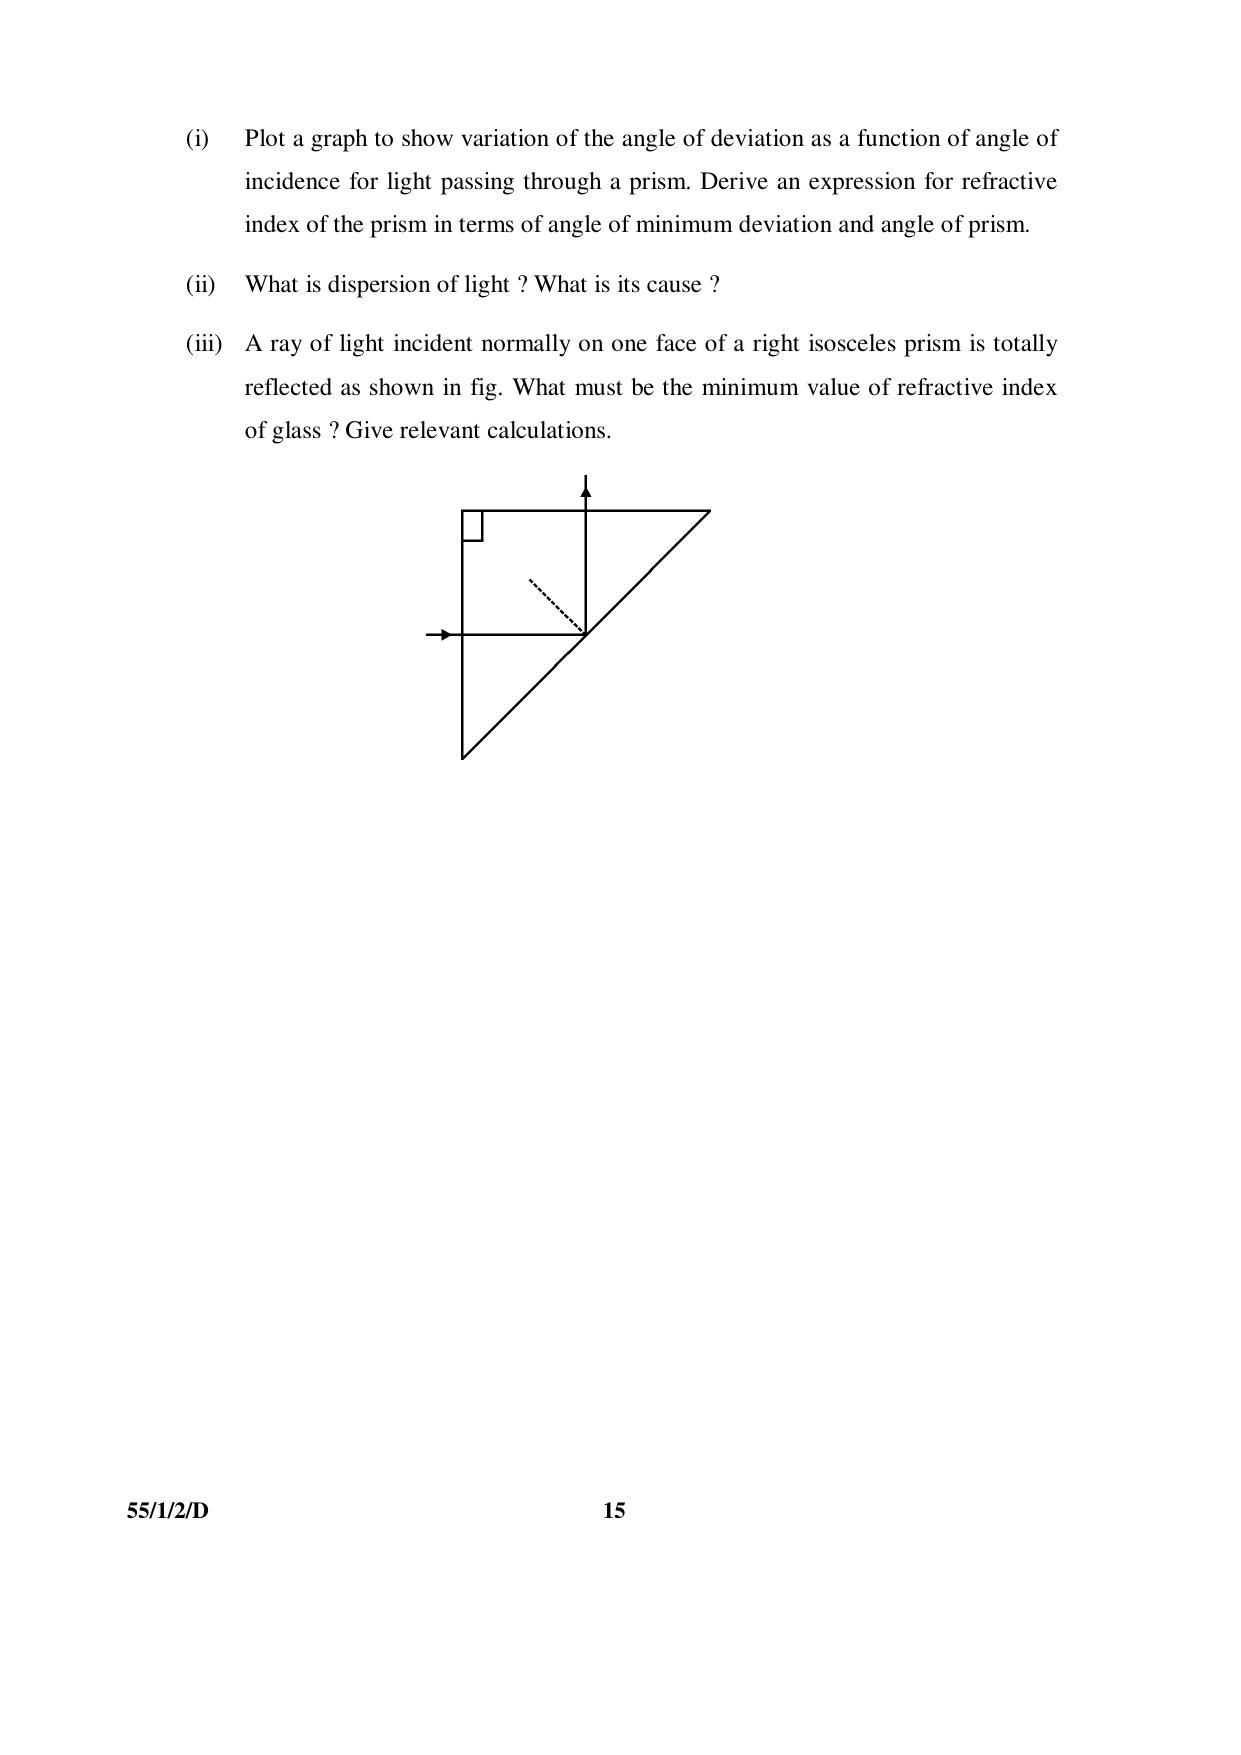 CBSE Class 12 55-1-2-D PHYSICS 2016 Question Paper - Page 15